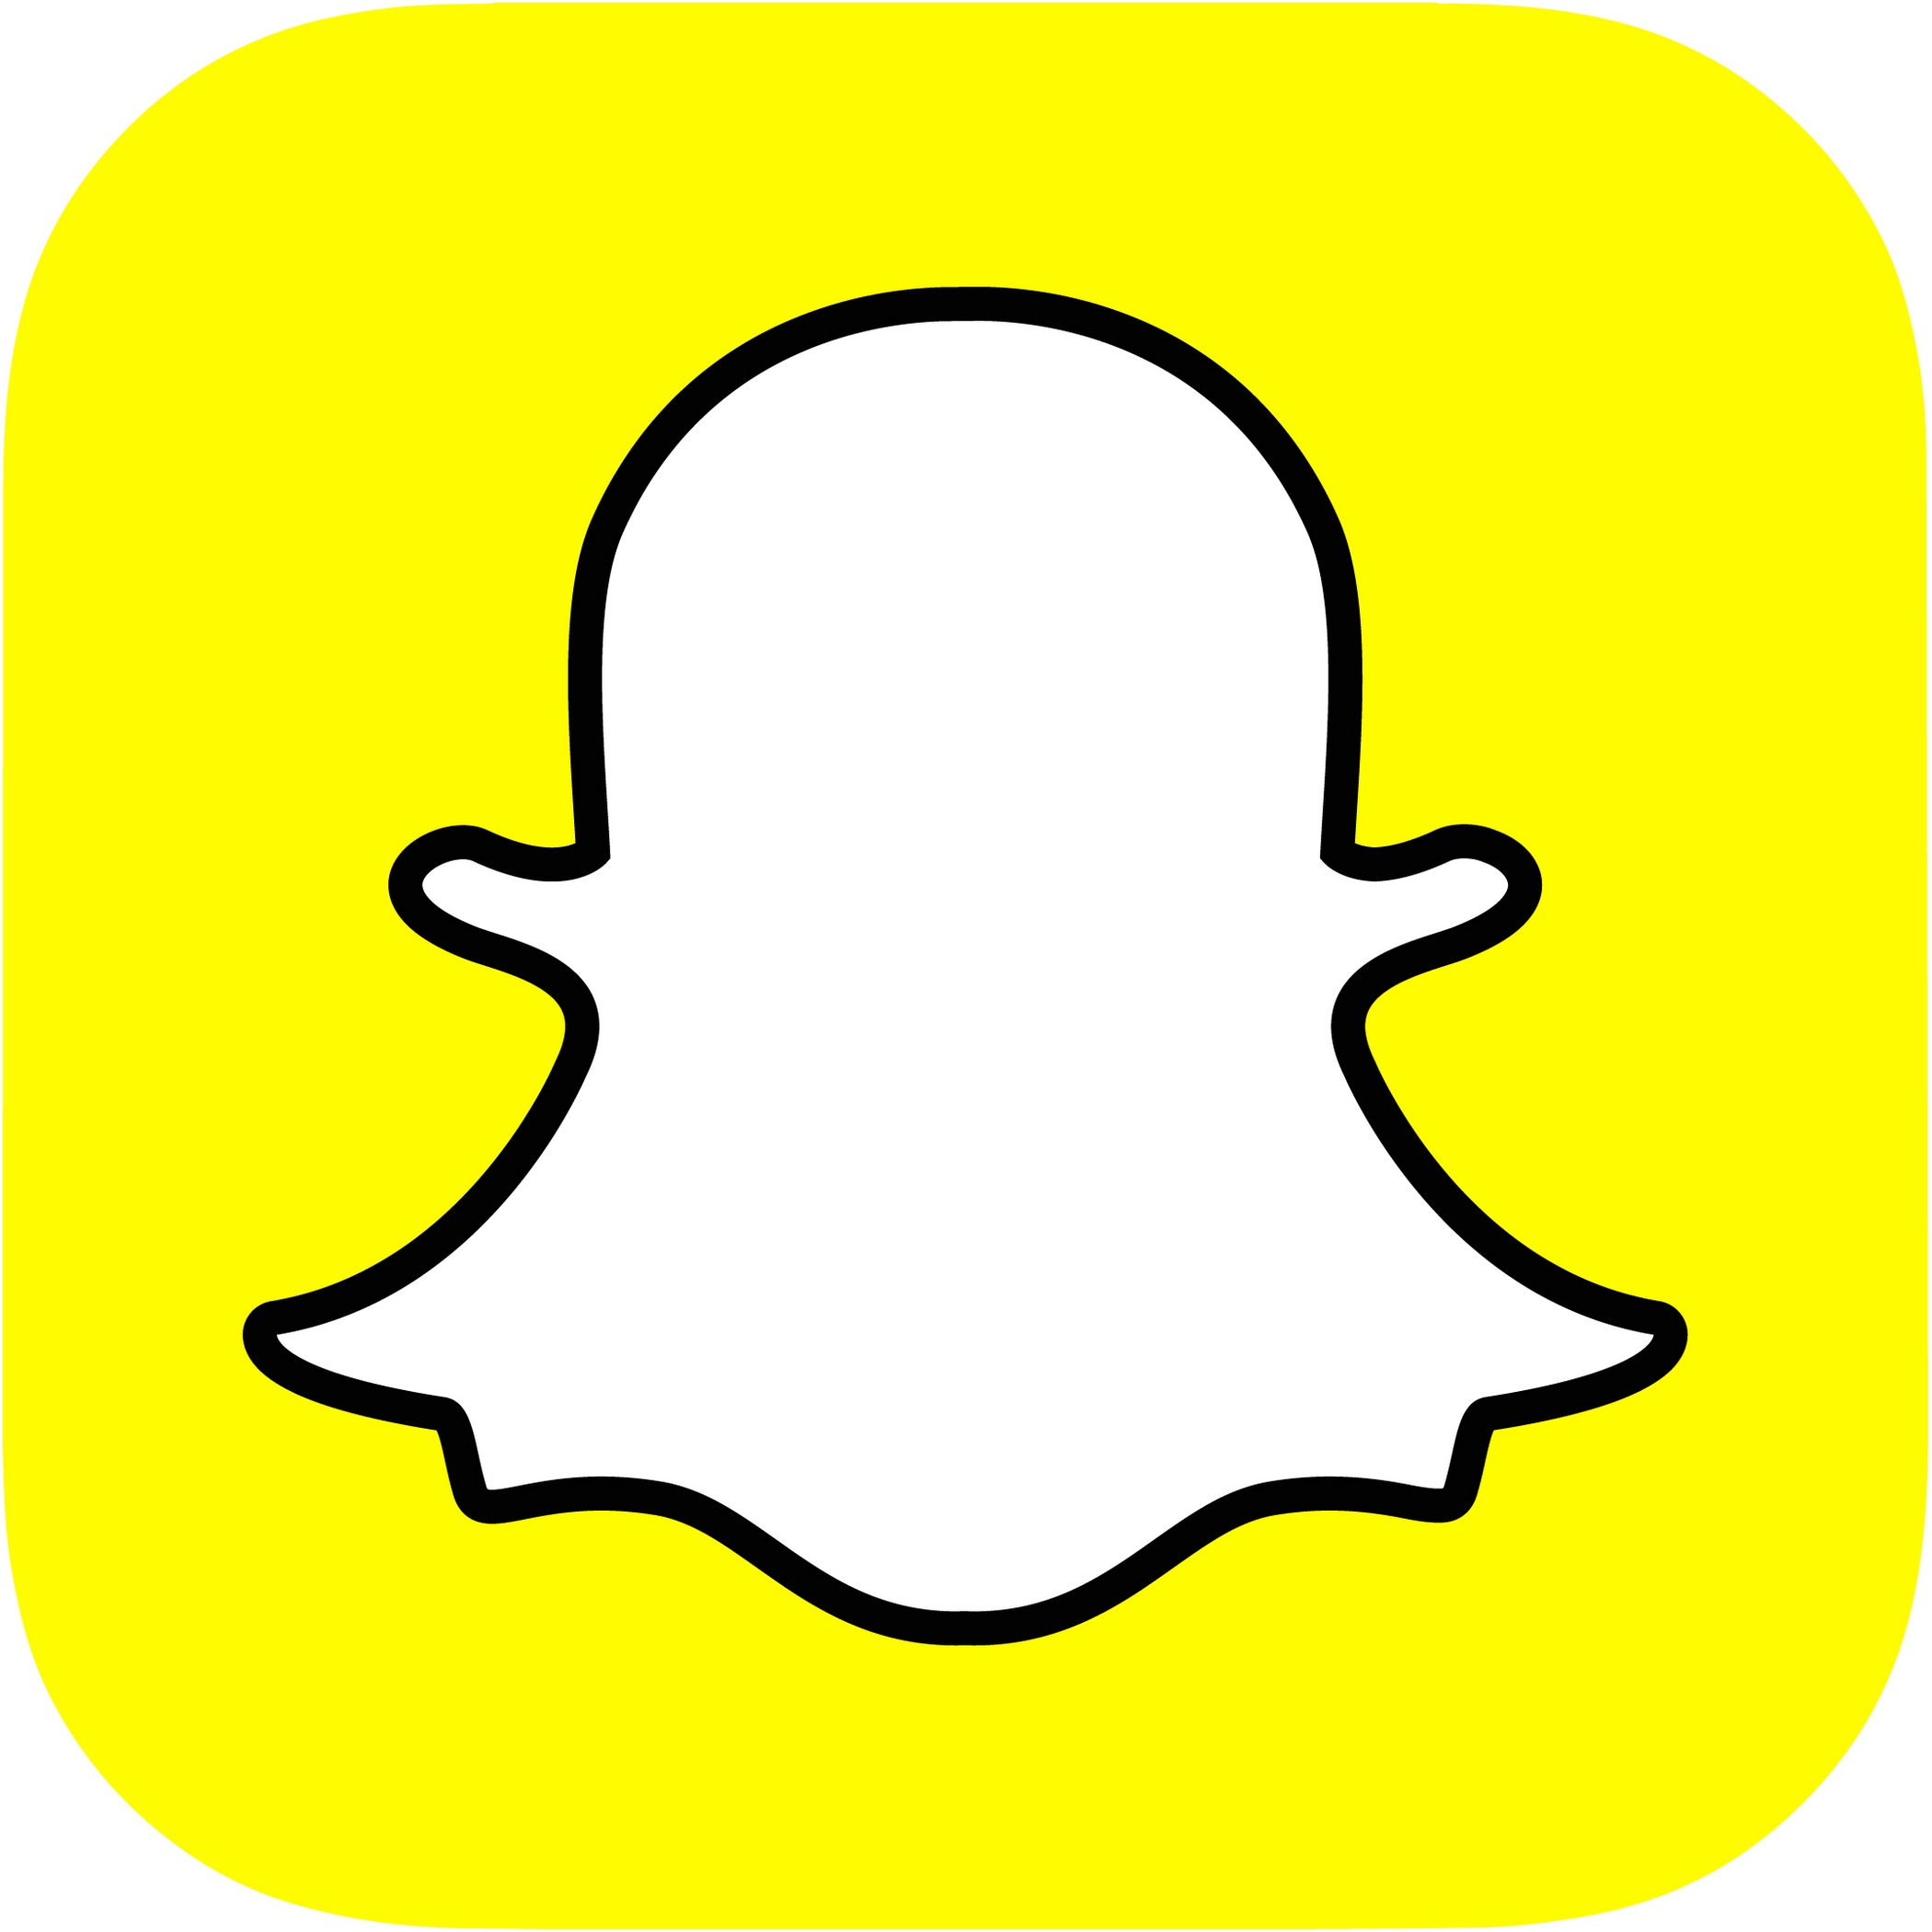 Software S Snapchat Social Networking Service Www Snapchat Com